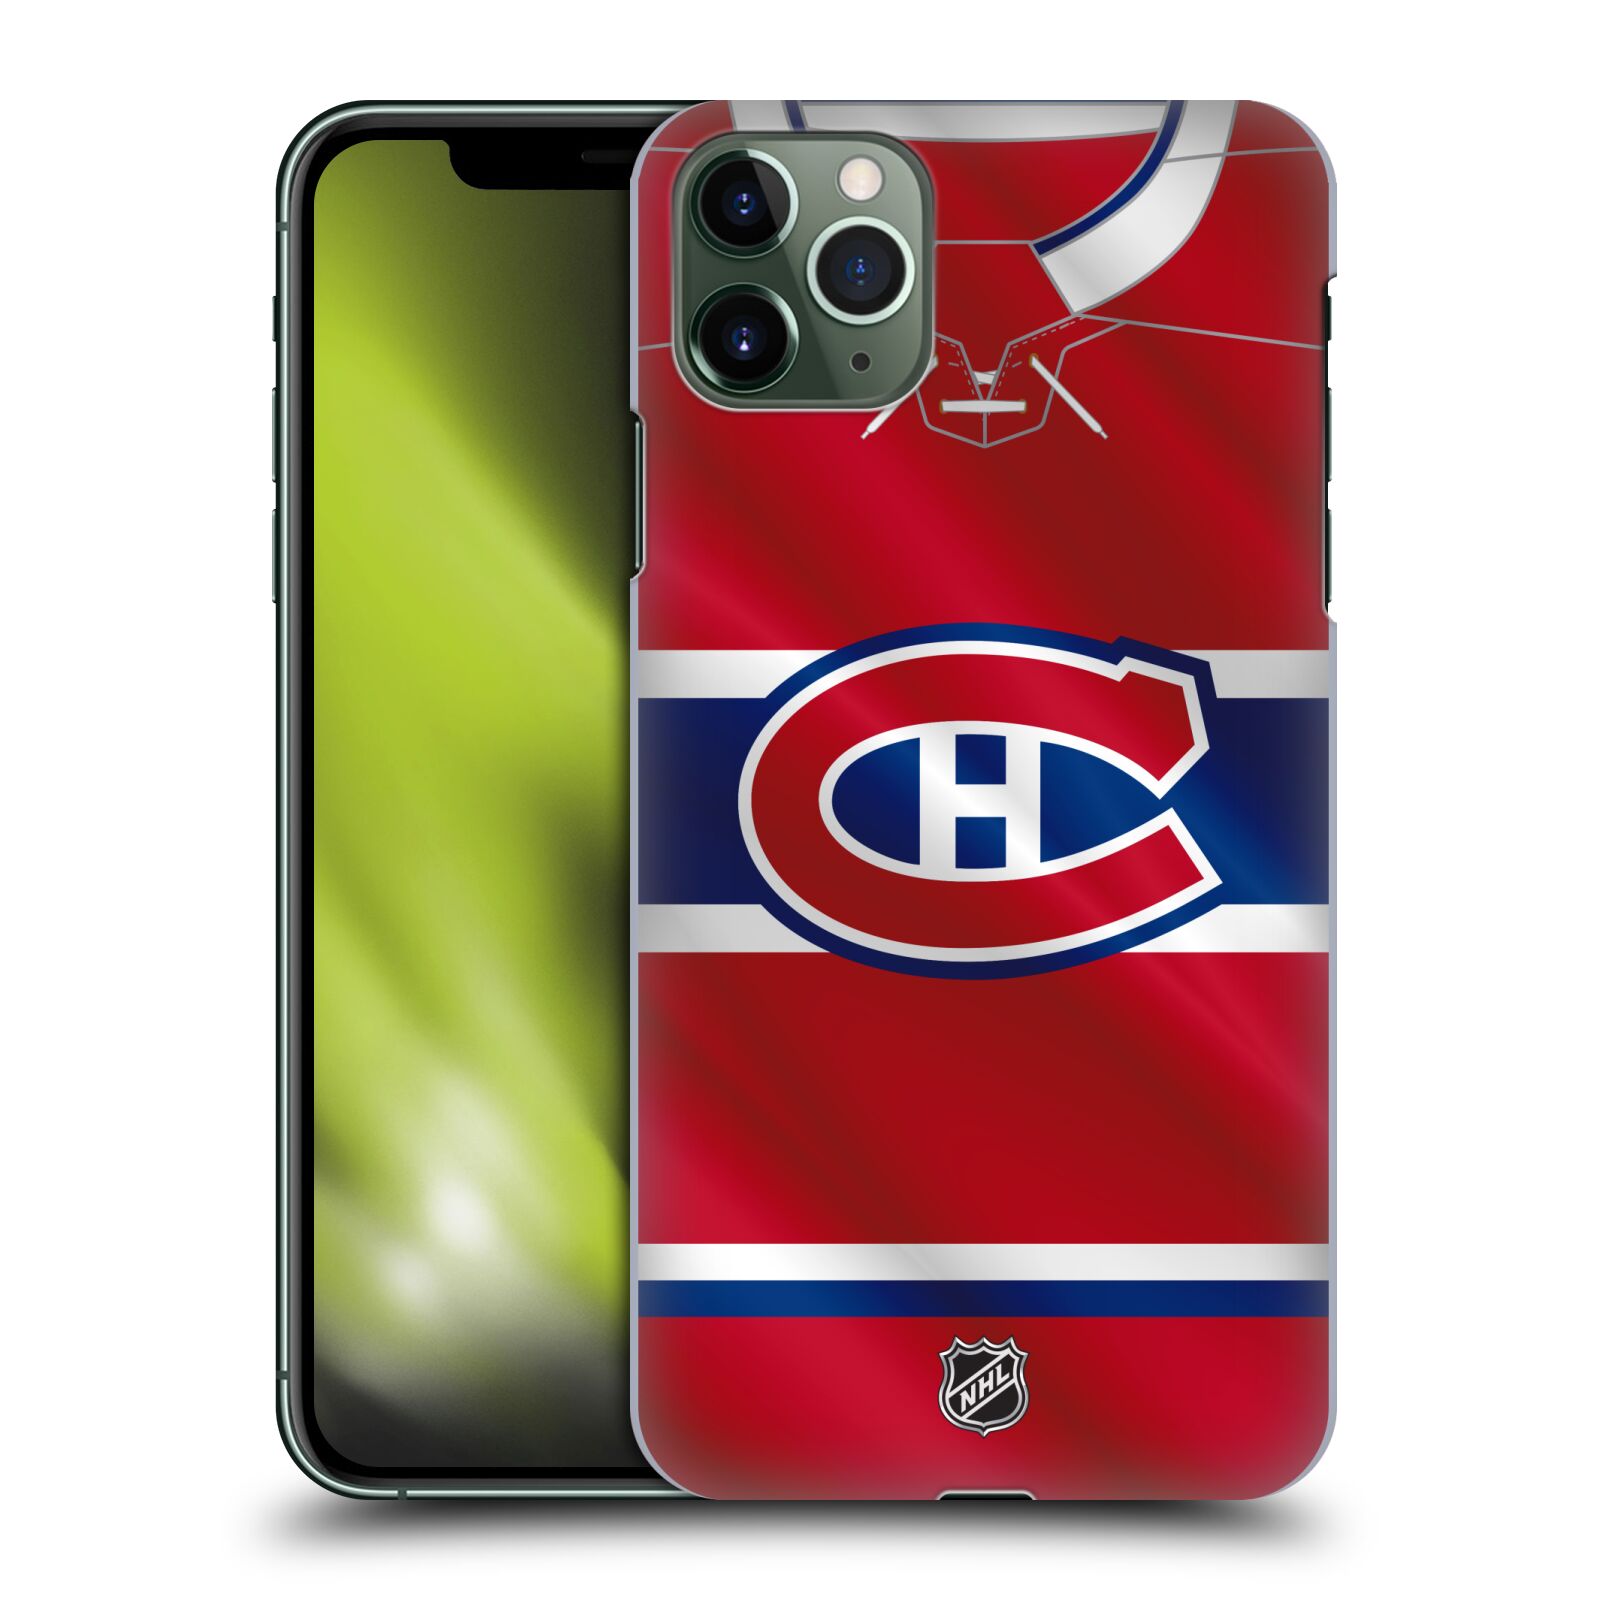 Pouzdro na mobil Apple Iphone 11 PRO MAX - HEAD CASE - Hokej NHL - Montreal Canadiens - Dres